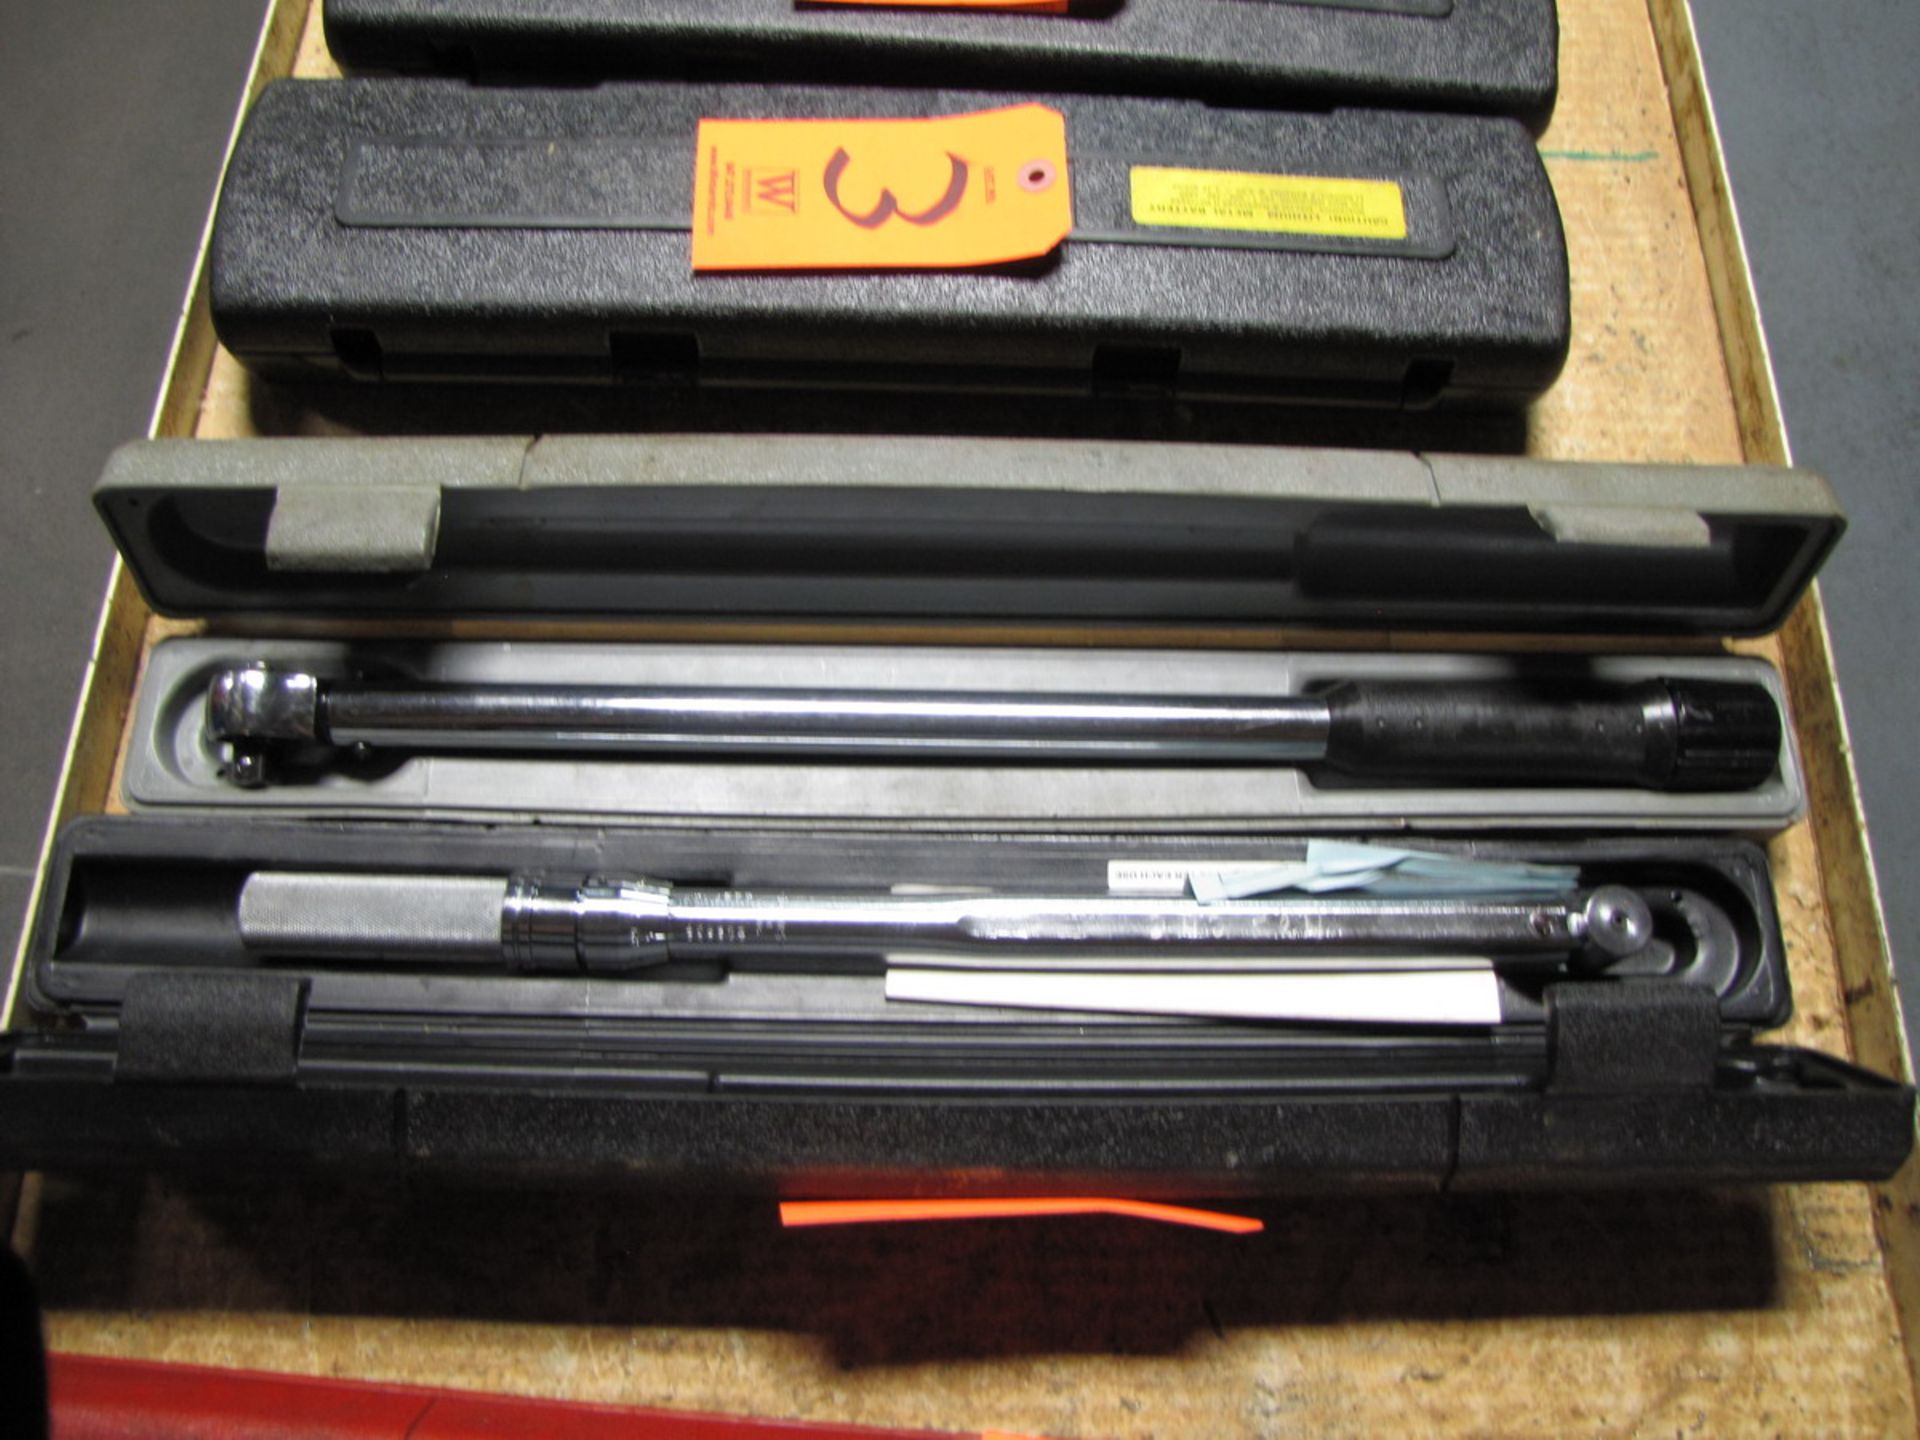 Utica Model TCI-150FN 1/2 in. Drive Clicker Type Torque Wrench, 30-150 Ft.-Lb. Capacity (Plant #1) - Image 2 of 2